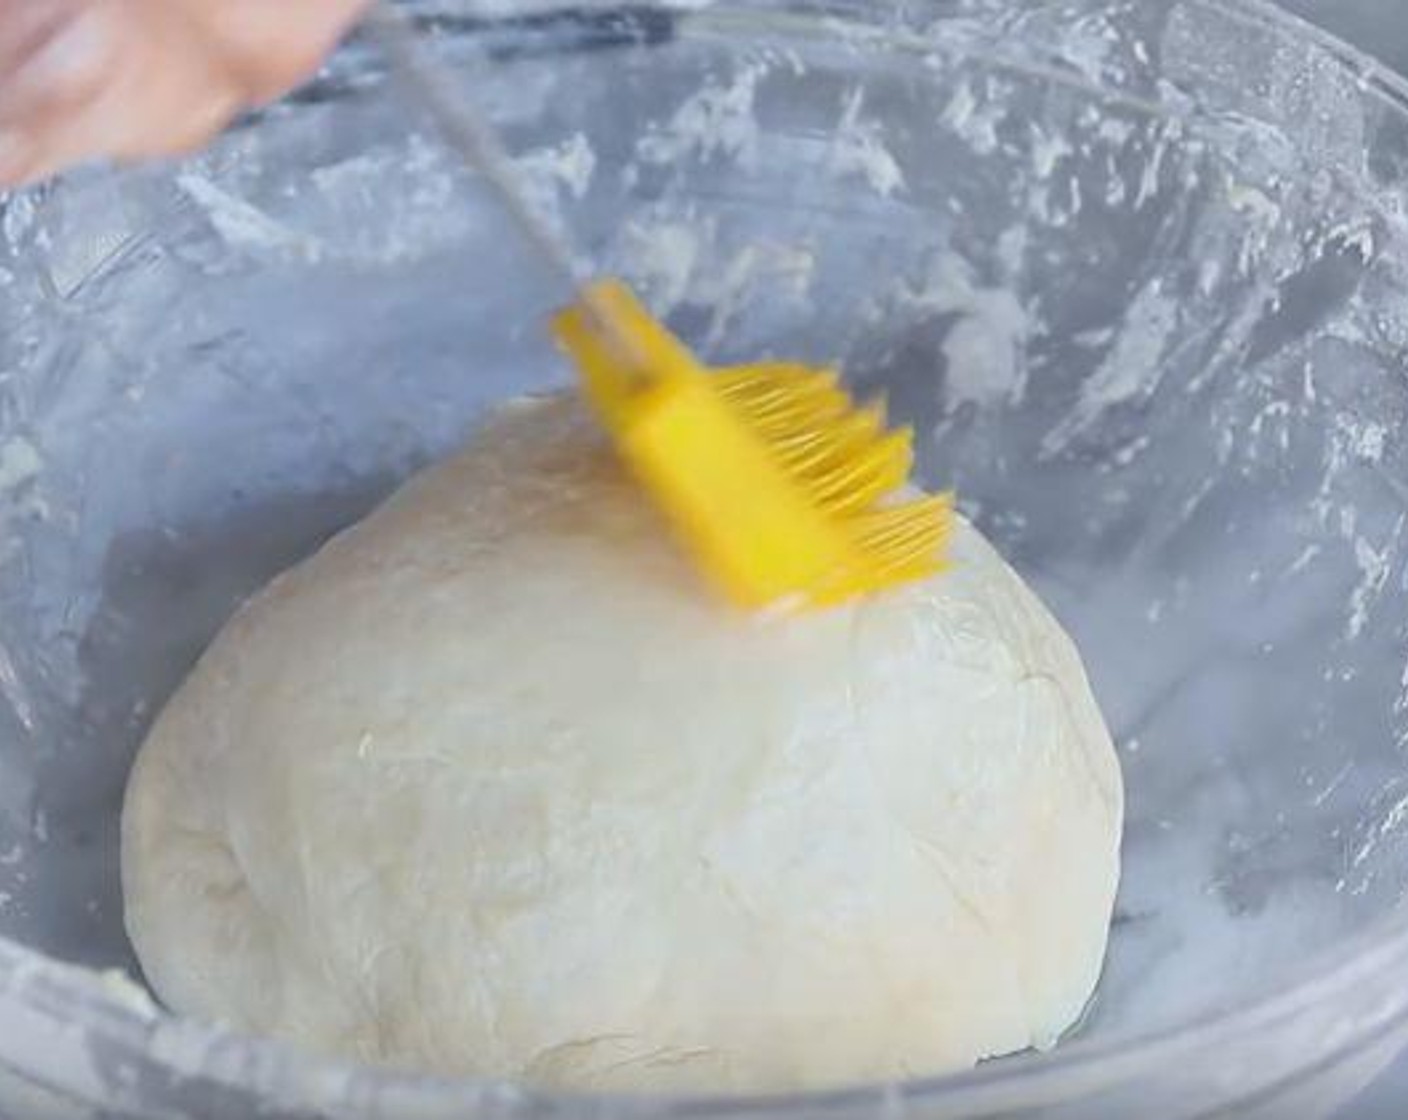 step 3 Oil the bowl, place the dough in the bowl, brush the top and sides of the dough, cover with plastic wrap or kitchen towel and let the dough double in size for 1 1/2 hours.